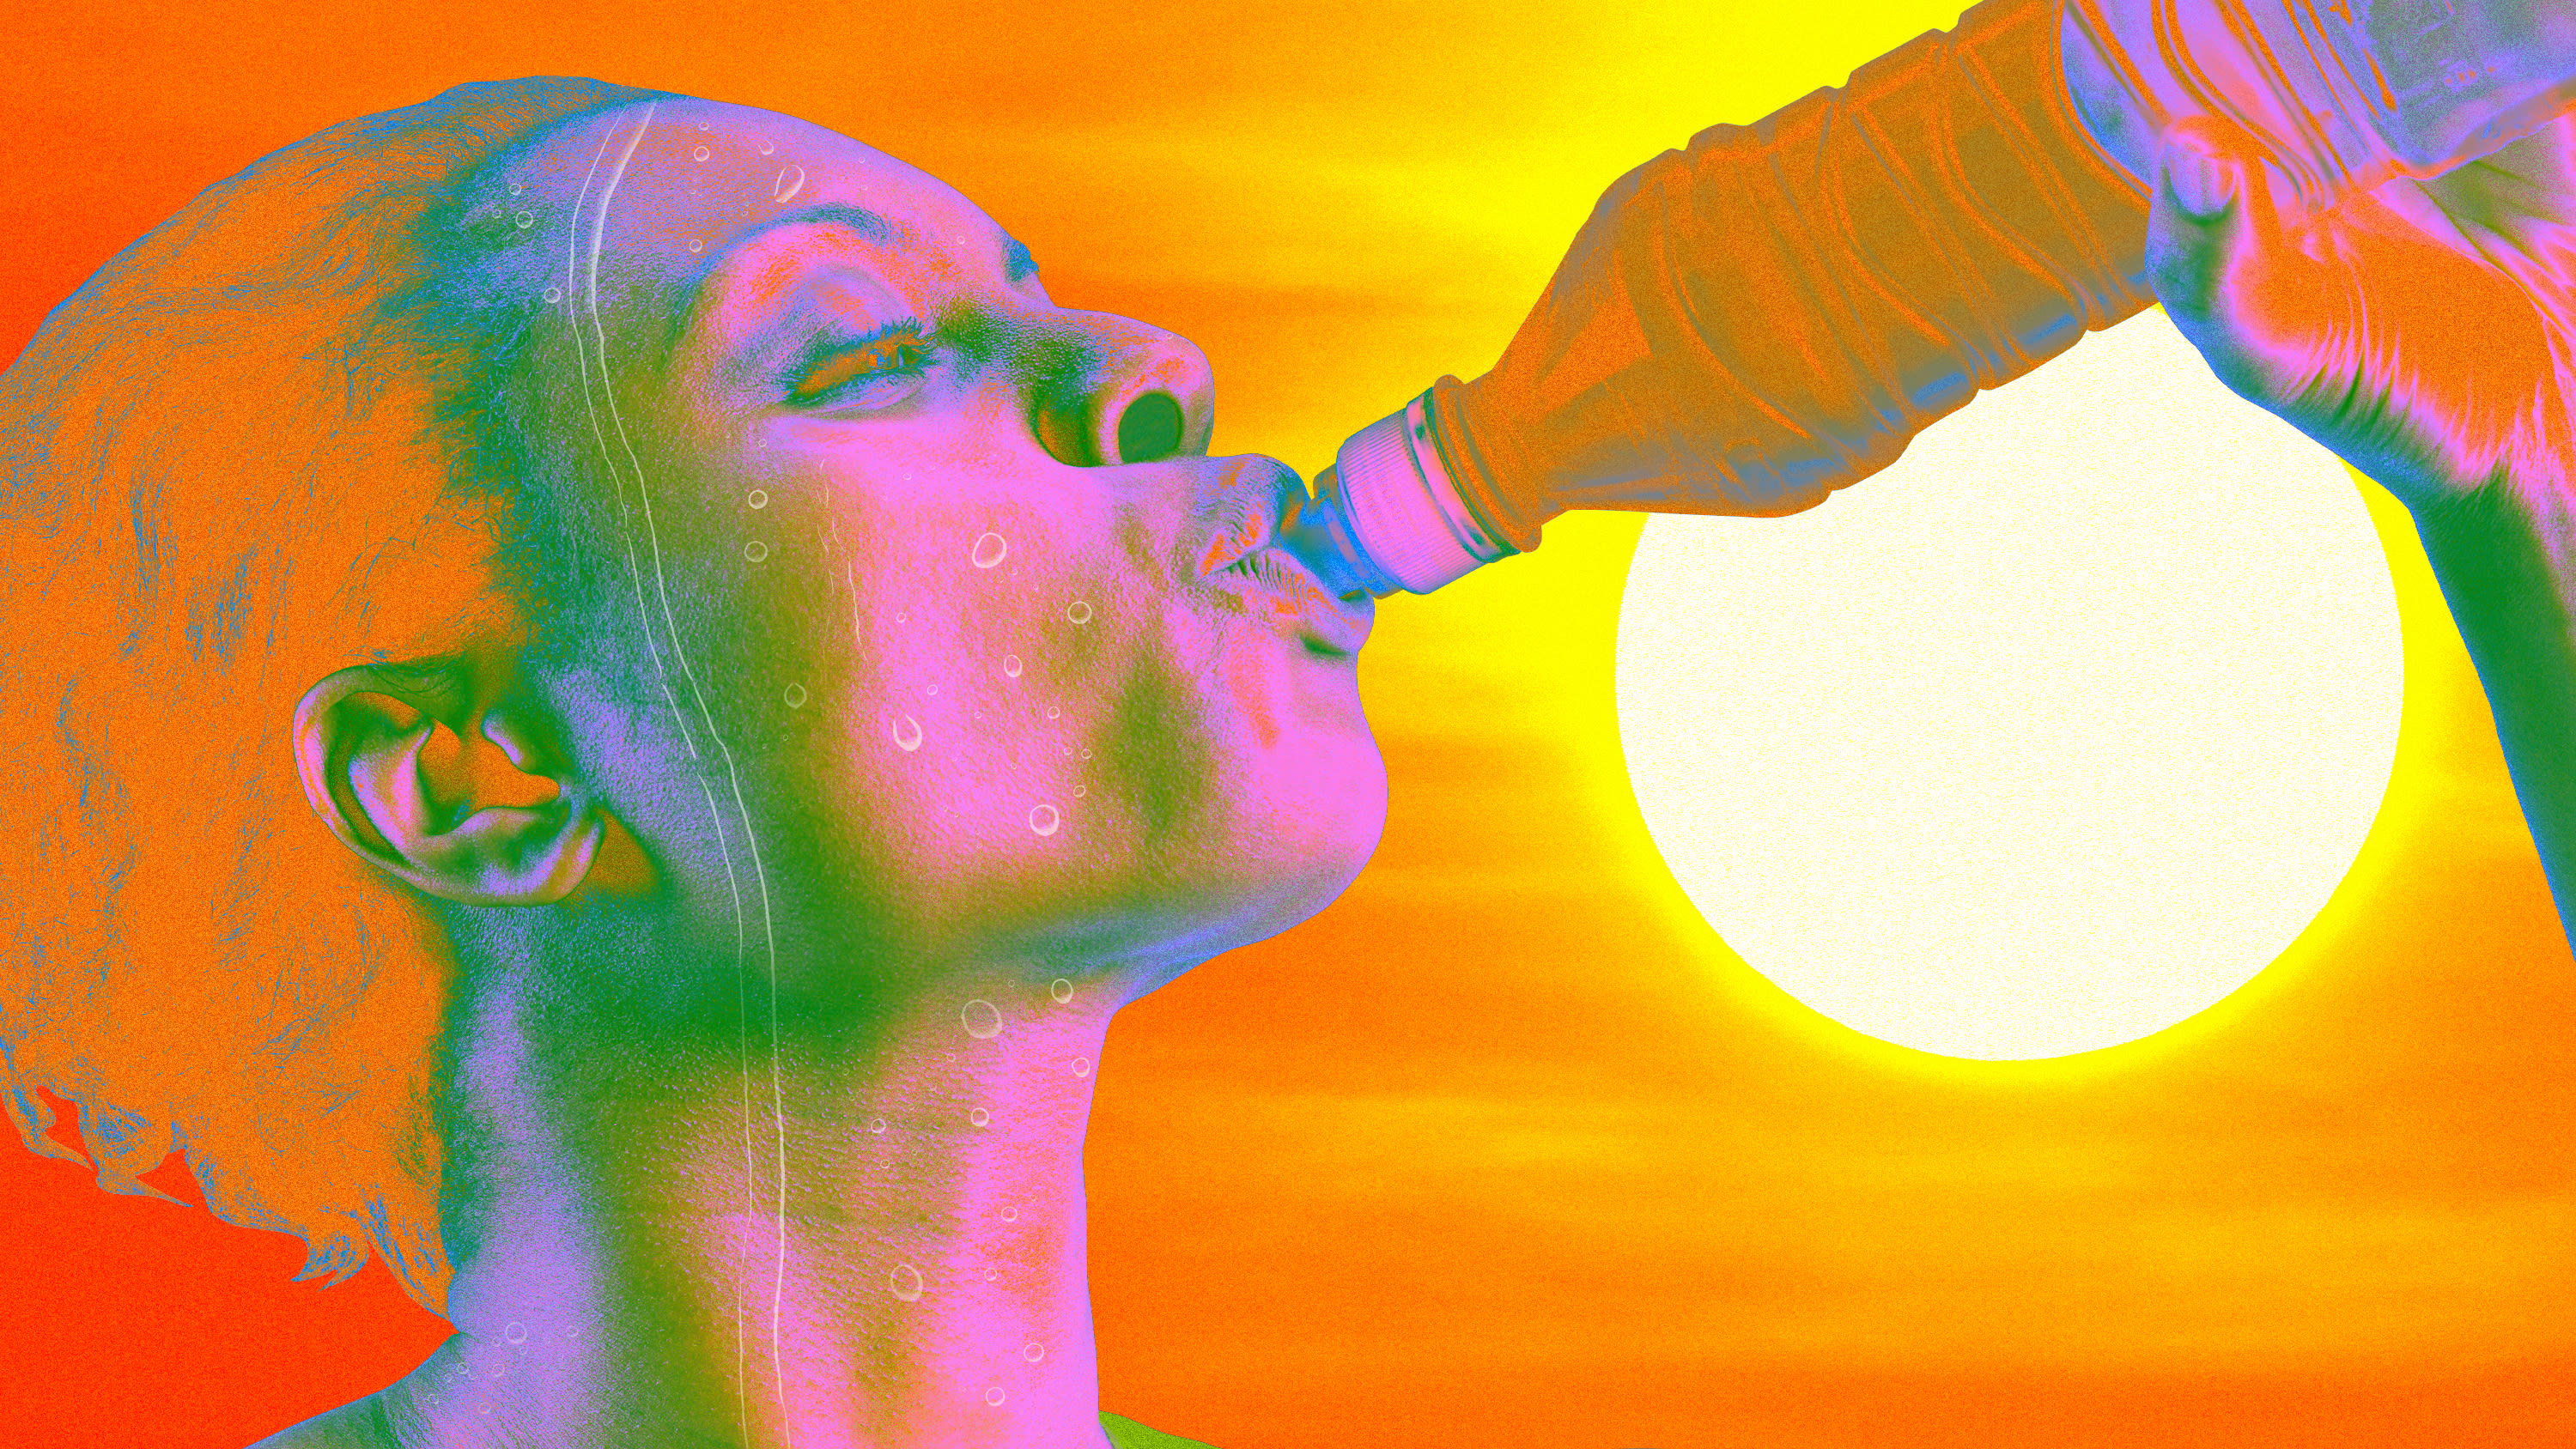 Heat stroke and other illness symptoms to watch for as deadly heat waves continue across the country